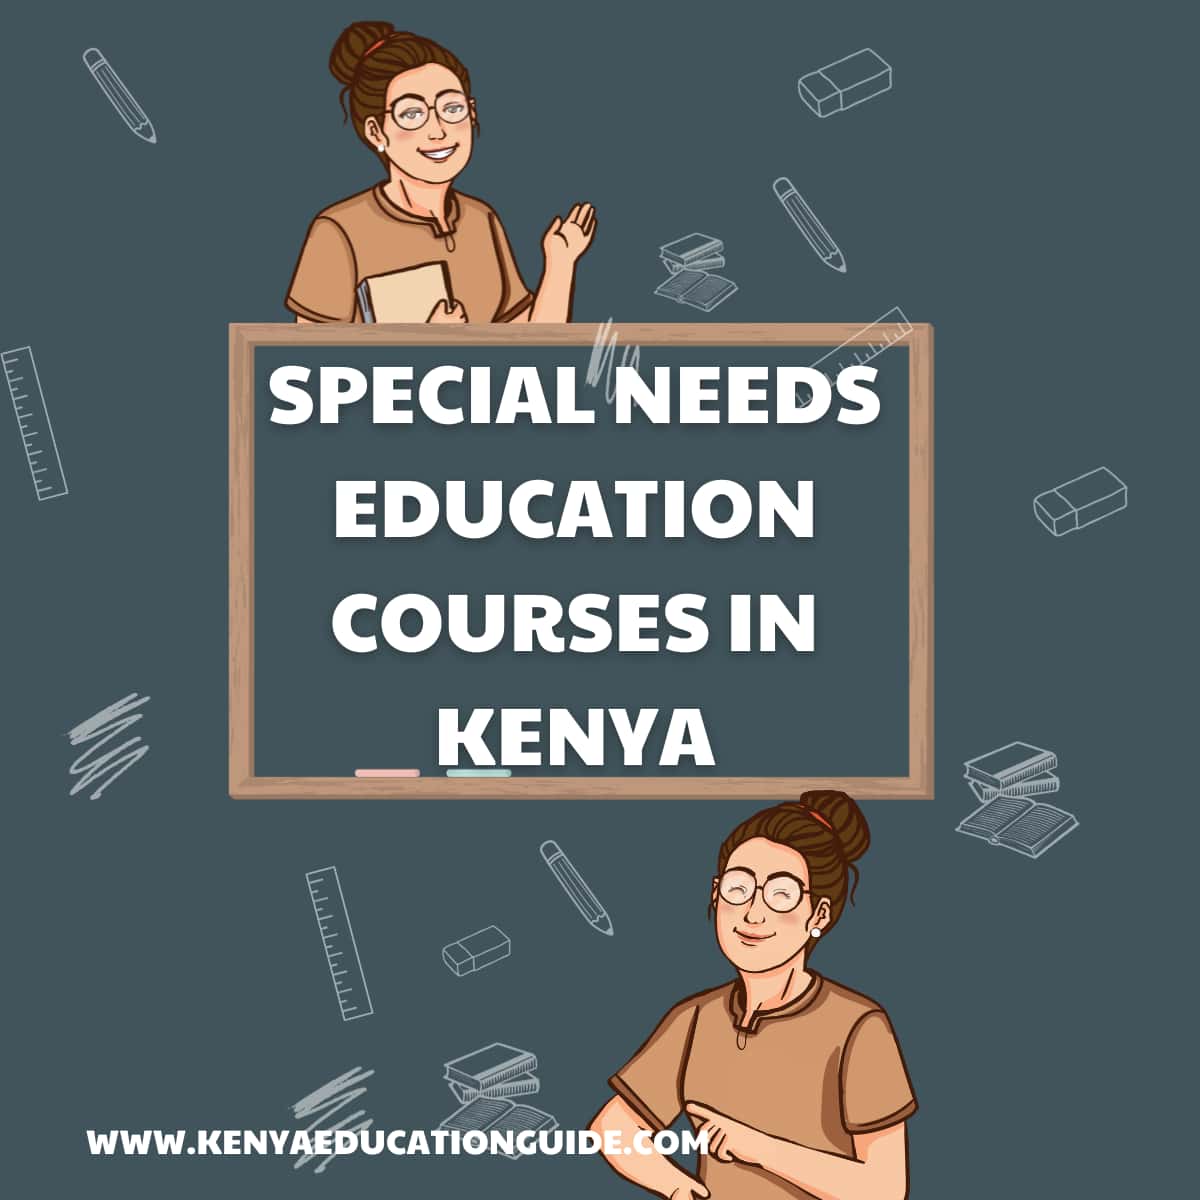 Special Needs Education Courses in Kenya